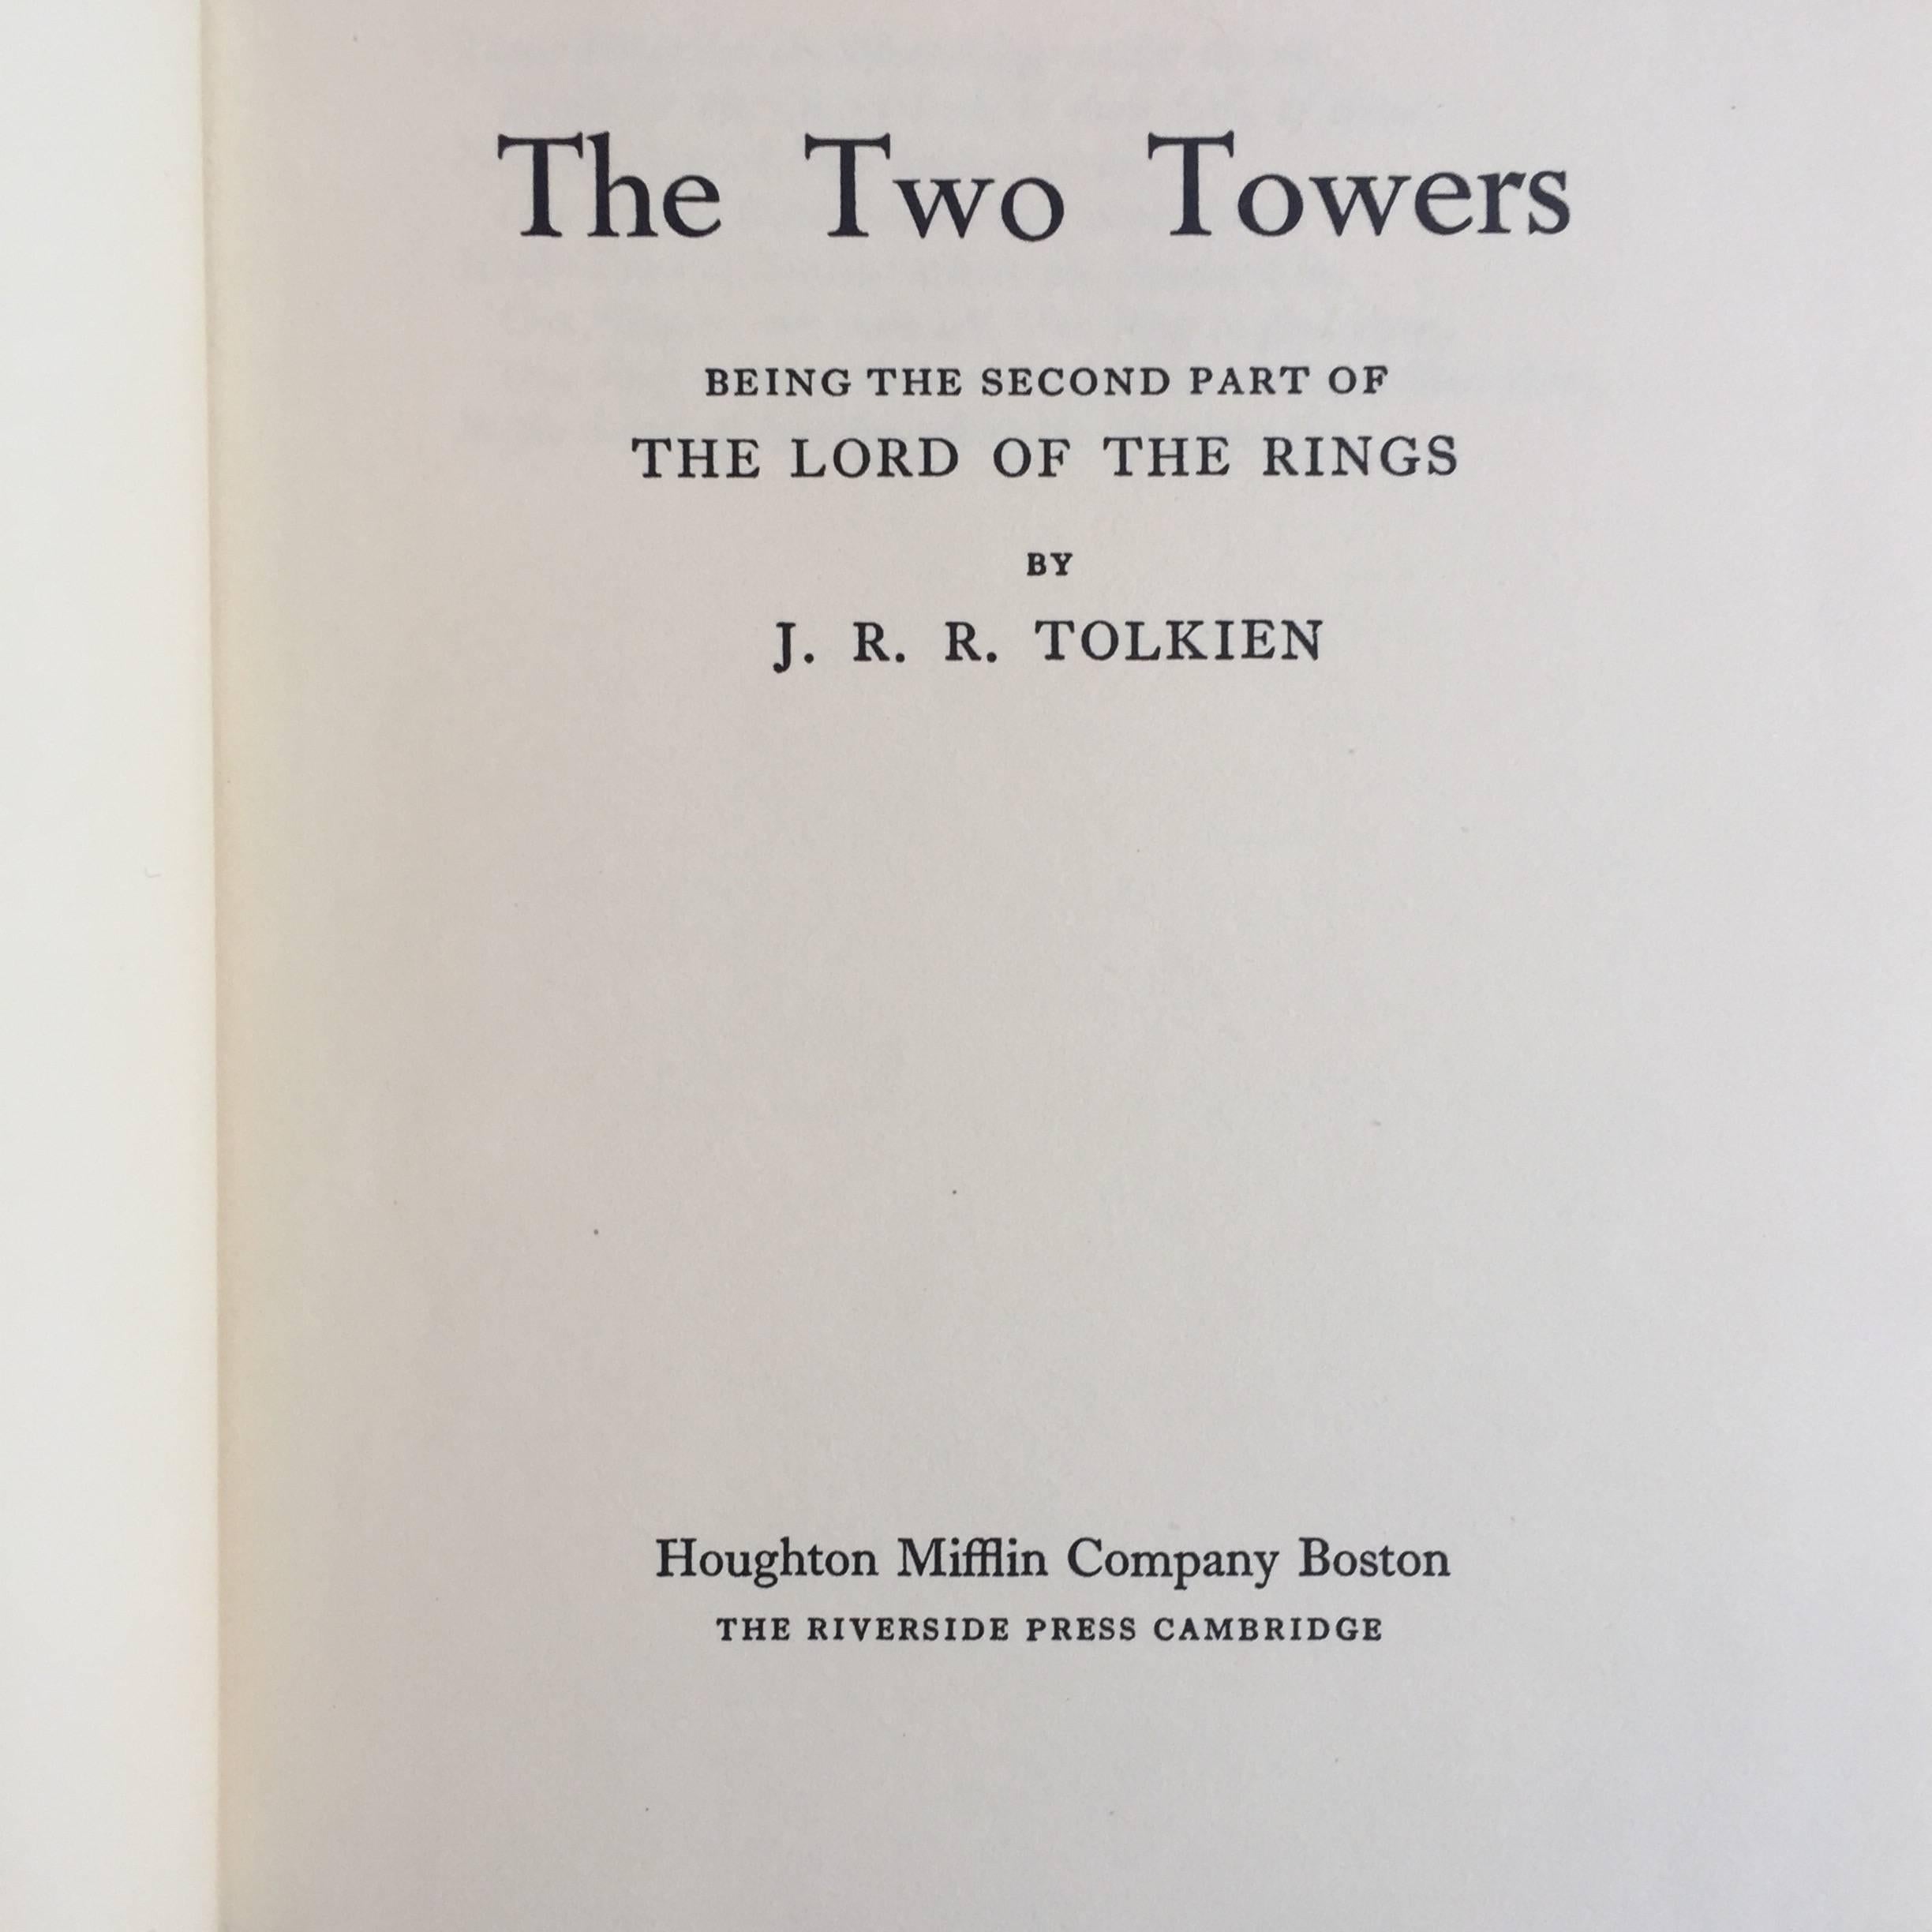 First U.S edition, published by Houghton Mifflin Company, Boston, in 1954, 1955 and 1956.

This is the first U.S edition of the epic trilogy, 'The Lord of the Rings', written by J. R. R. Tolkien, this series includes 'The Fellowship of the Ring',